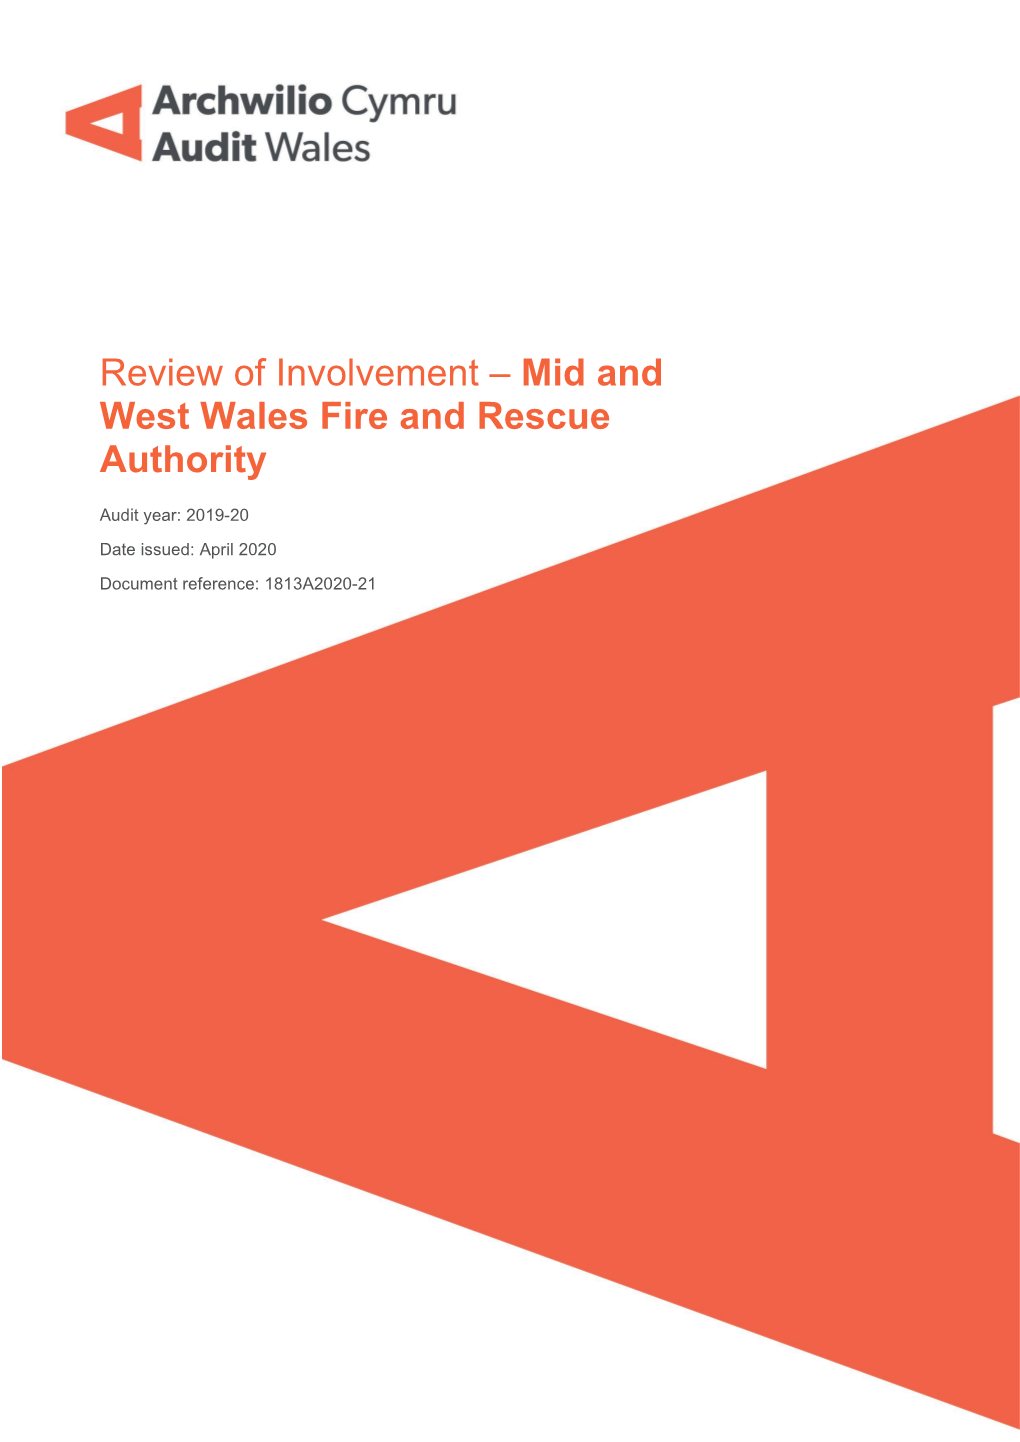 Mid and West Wales Fire and Rescue Authority